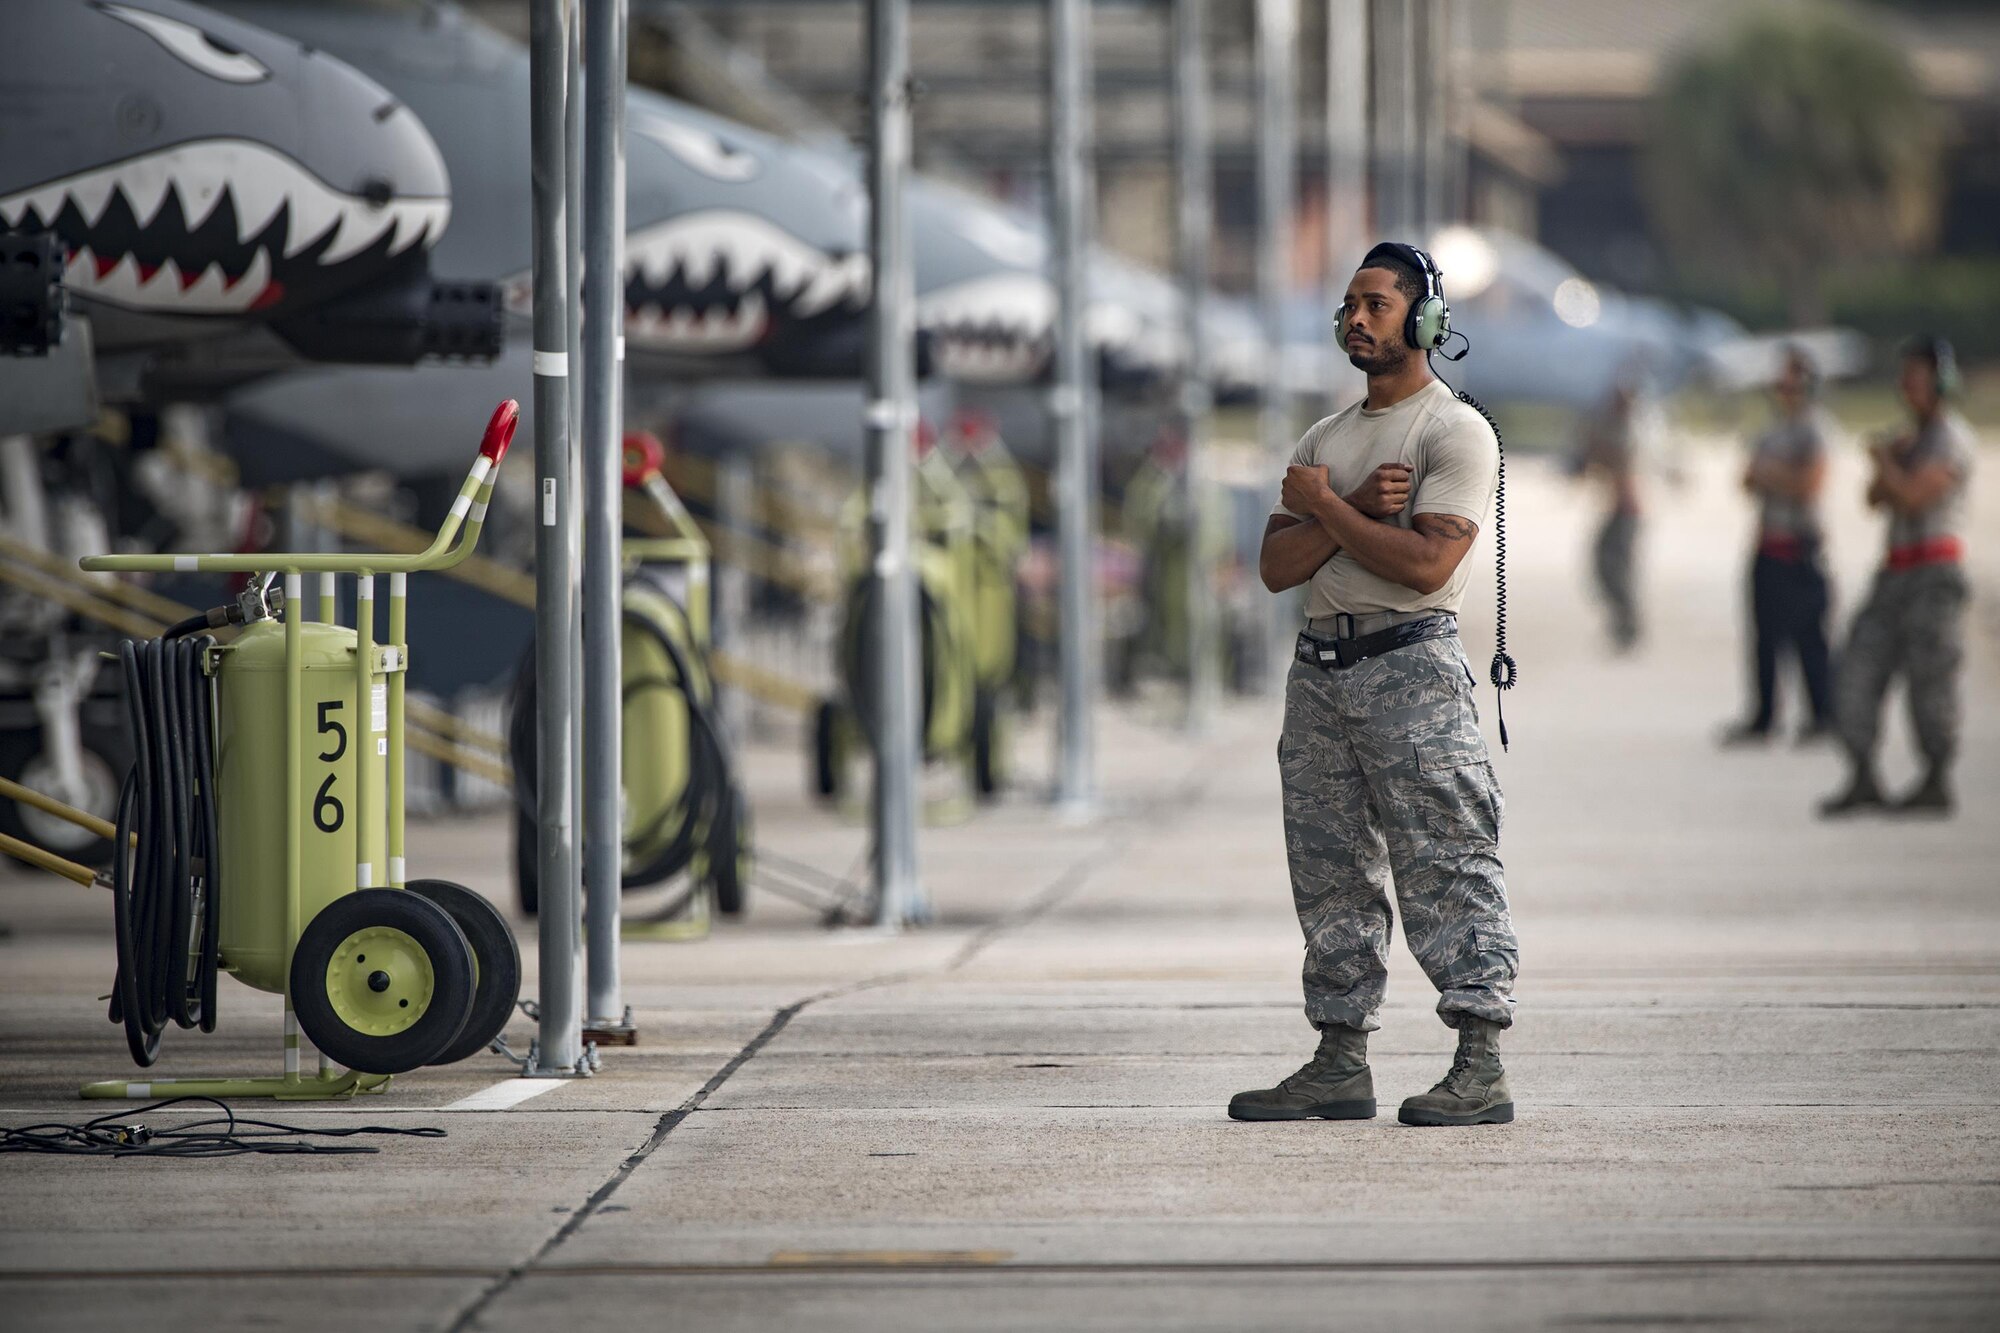 Staff Sgt. Danny Barthelemy, 75th Aircraft Maintenance Unit dedicated crew chief, marshals an A-10C Thunderbolt II aircraft, April 28, 2017, at Moody Air Force Base, Ga. The 75th FS departed for Combat Hammer, an air-to-ground exercise hosted at Hill Air Force Base, Utah. The exercise is designed to collect and analyze data on the performance of precision weapons and measure their suitability for use in combat. (U.S. Air Force photo by Staff Sgt. Ryan Callaghan)